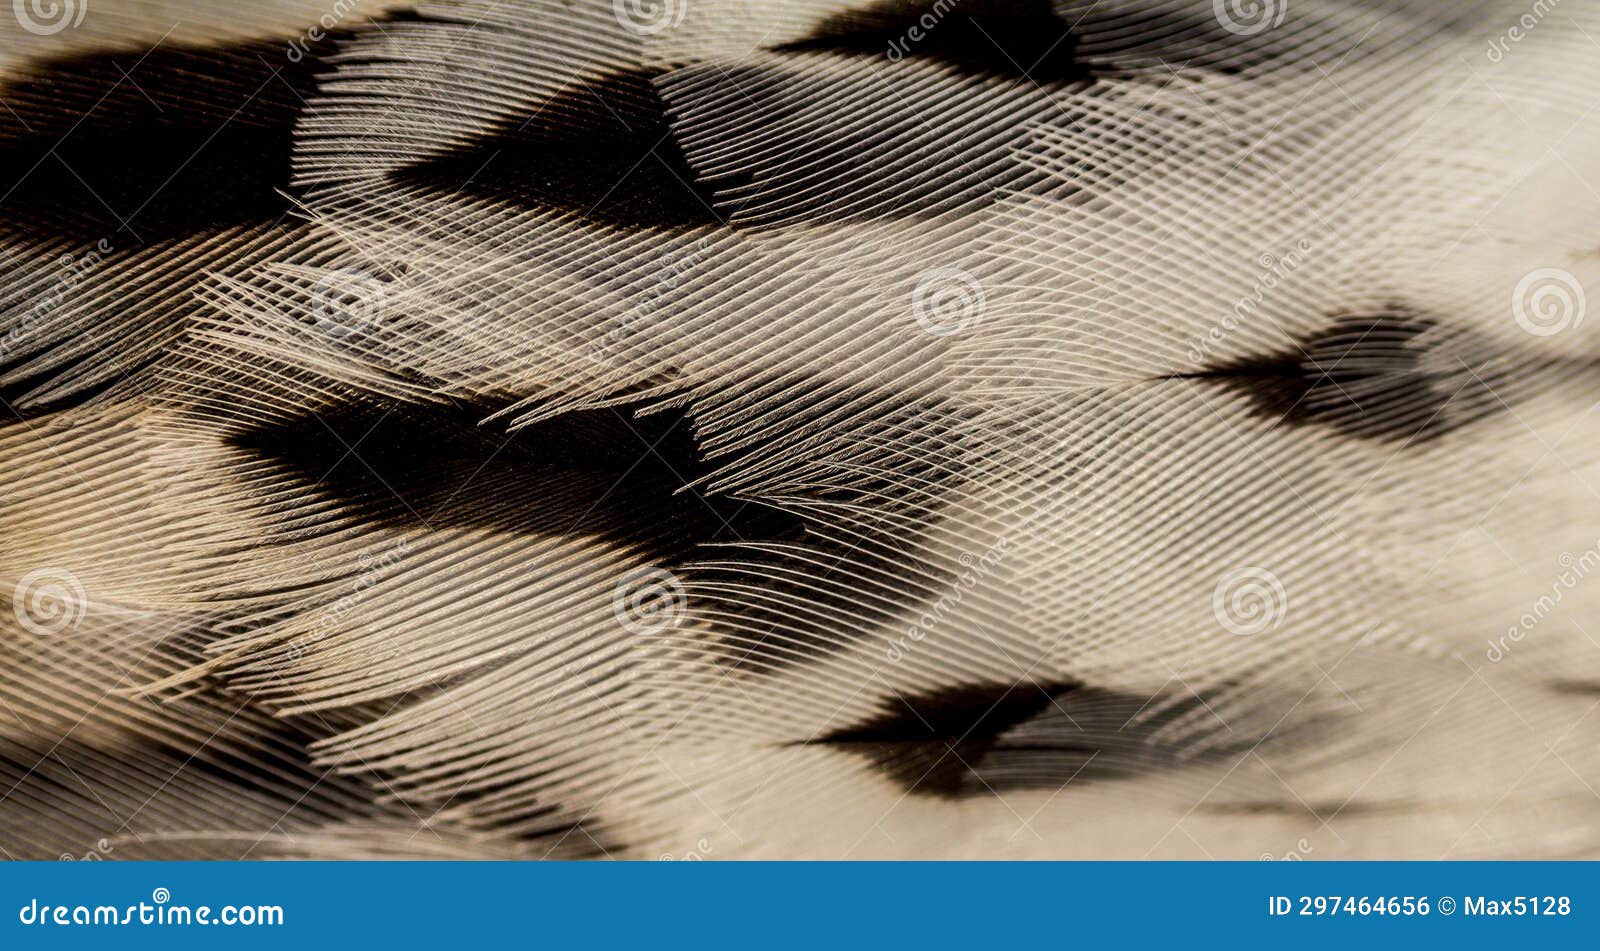 grouse feathers